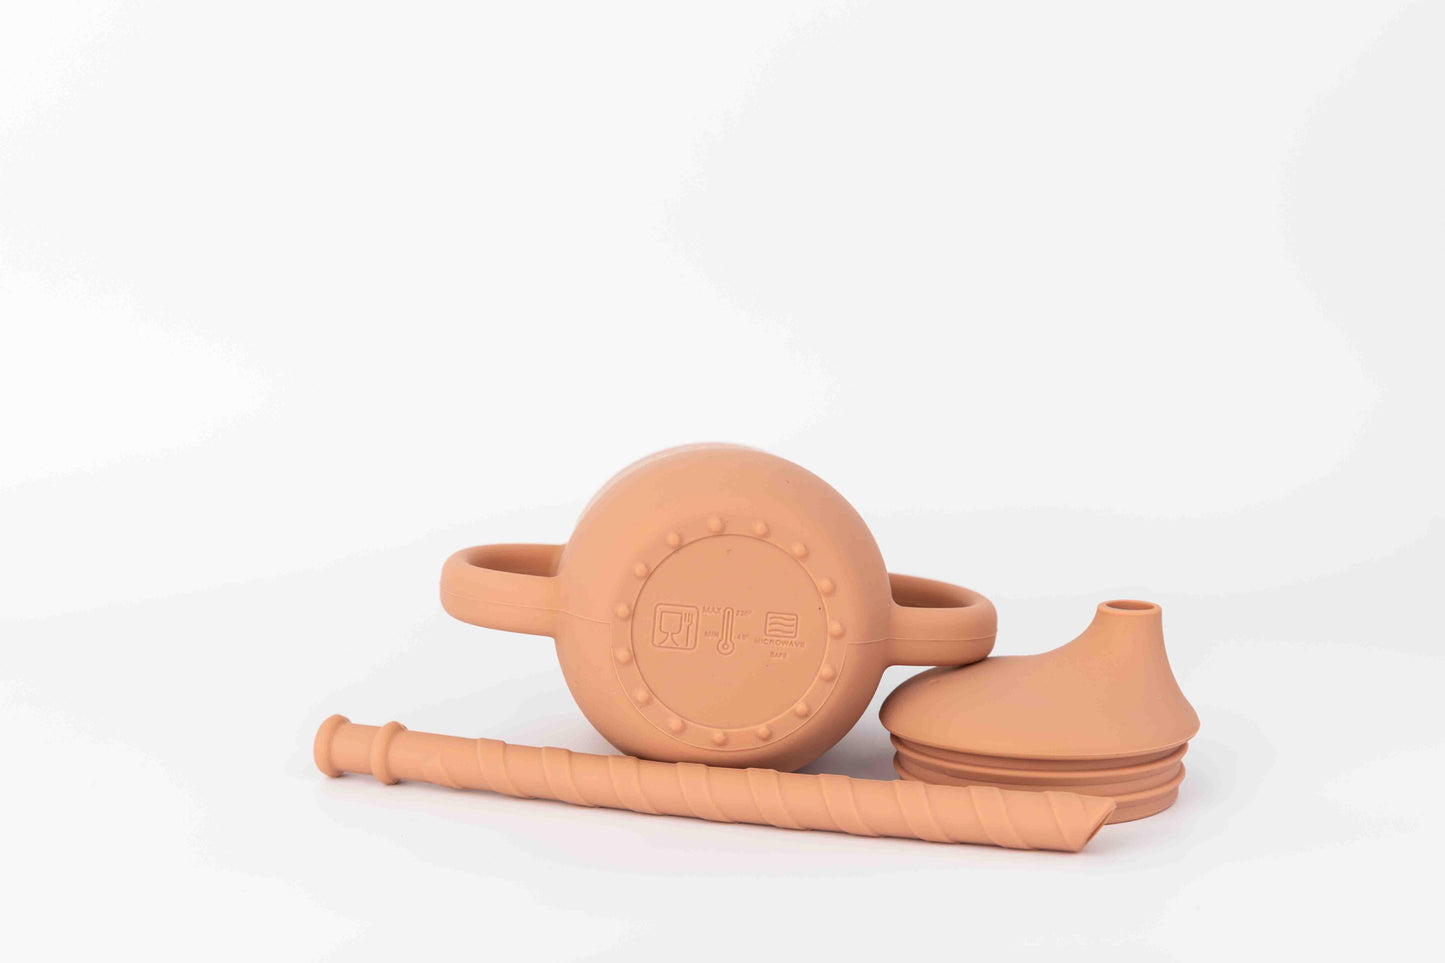 Saylor Mae Silicone Smoothie Cup - Toffee Coral